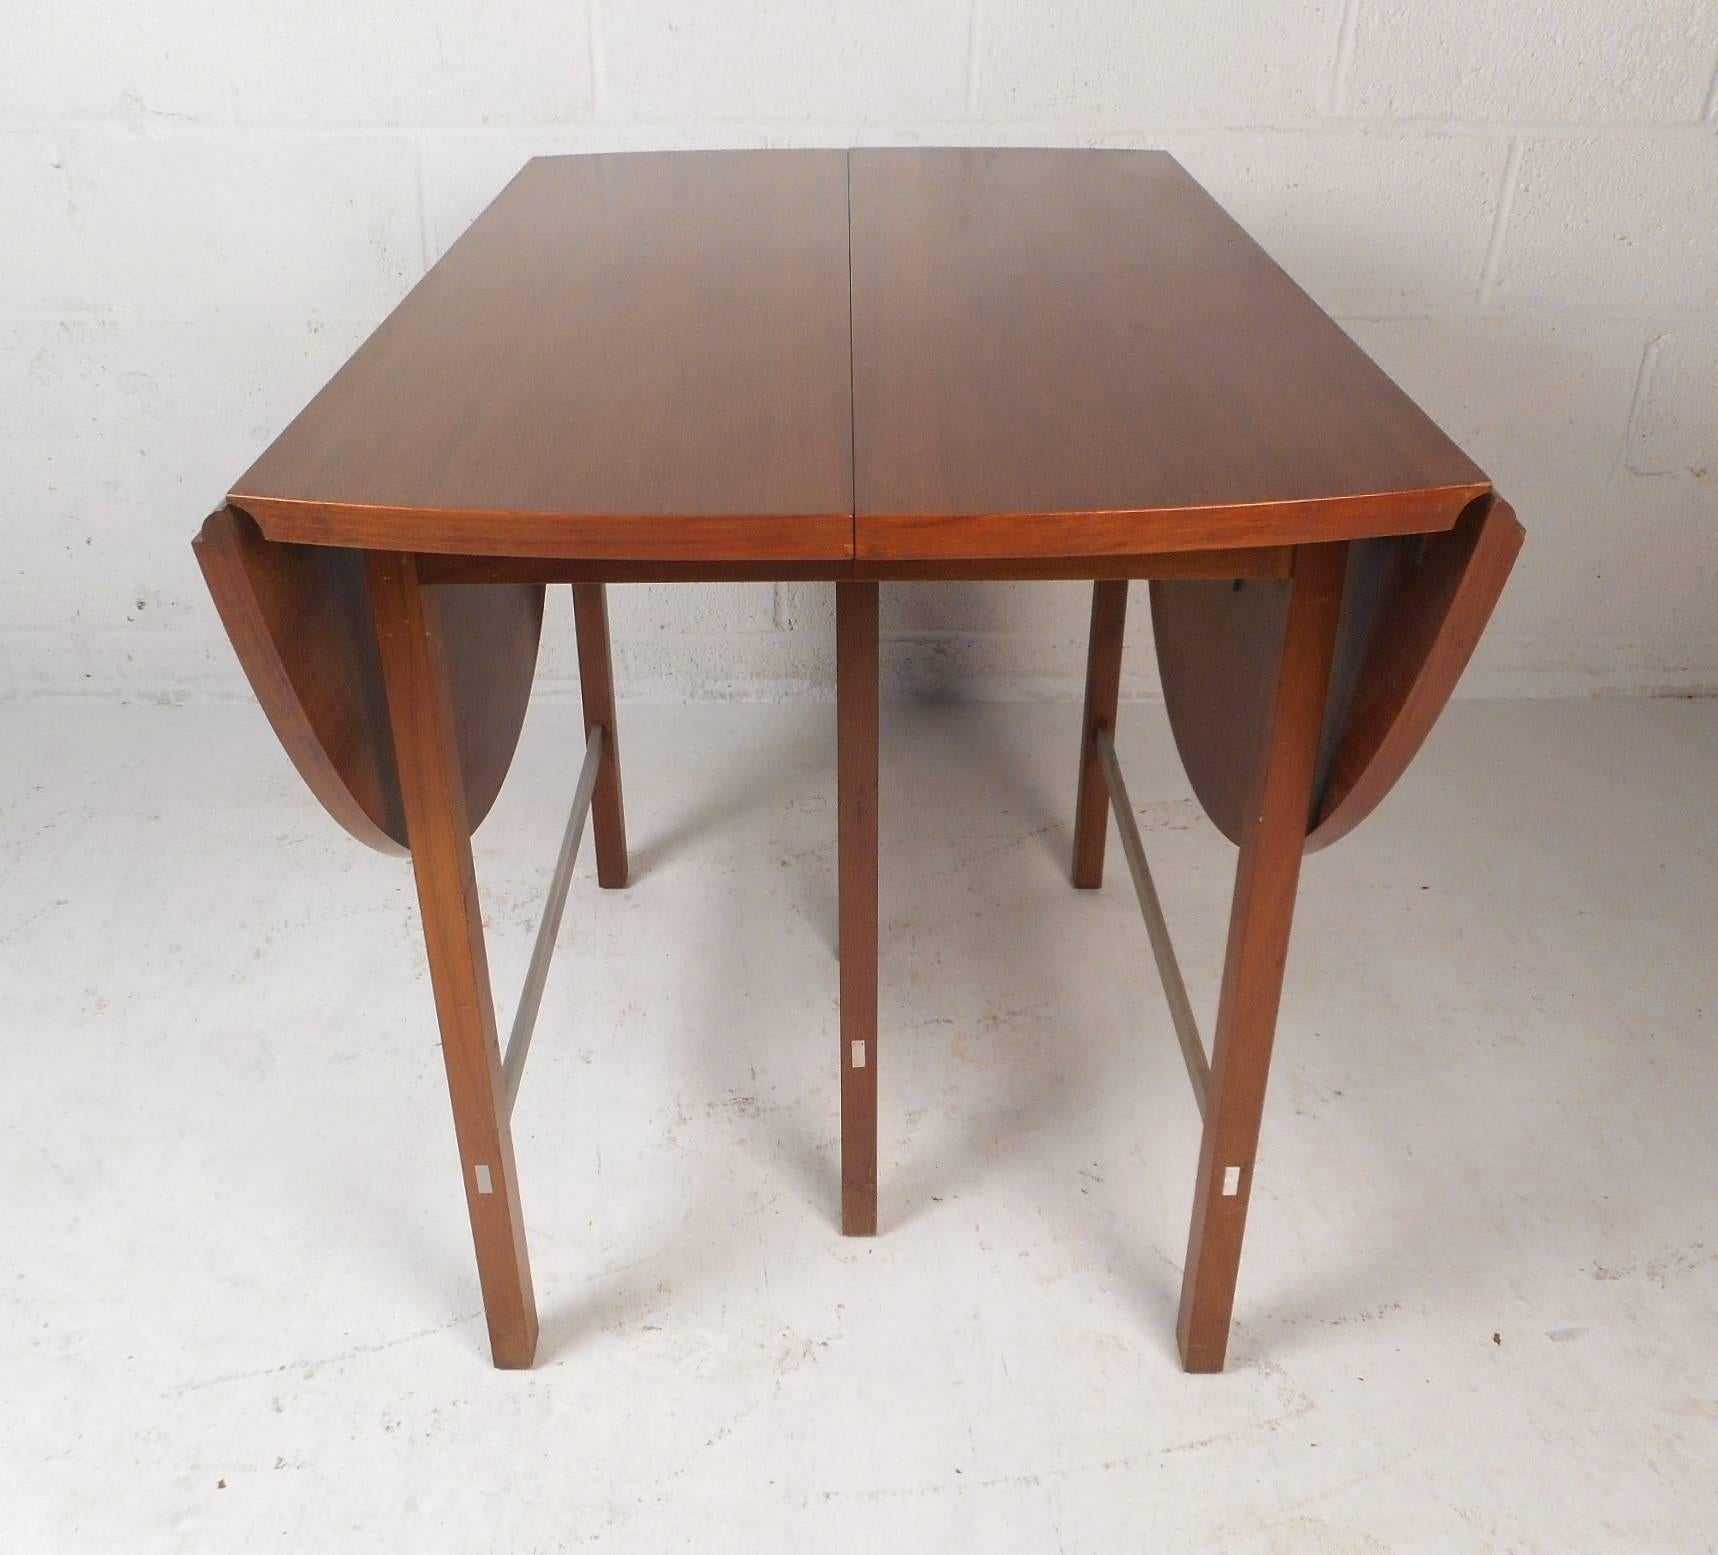 This gorgeous vintage modern dining table features a drop leaf design with three additional leaves allowing this table to go from 25.75 inches wide all the way to 90 inches wide. The sleek design has unique aluminum stretchers and lovely walnut wood